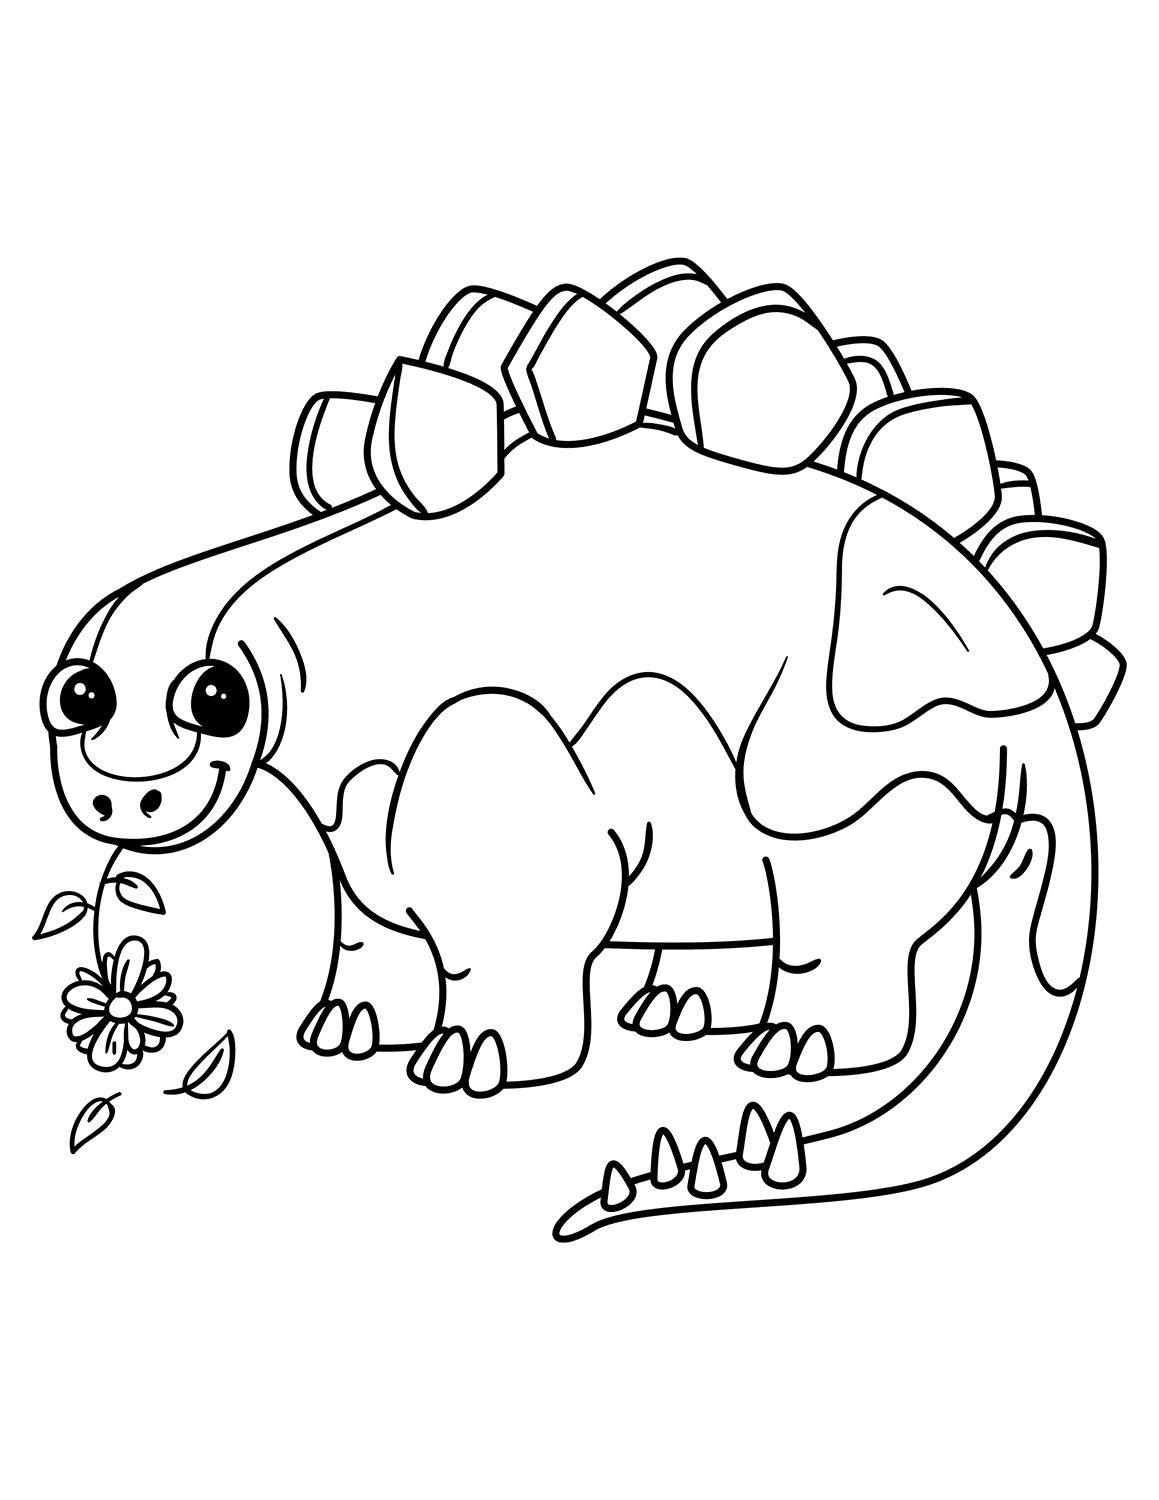 Cute Stegosaurus is held the flower by mouth Coloring Page